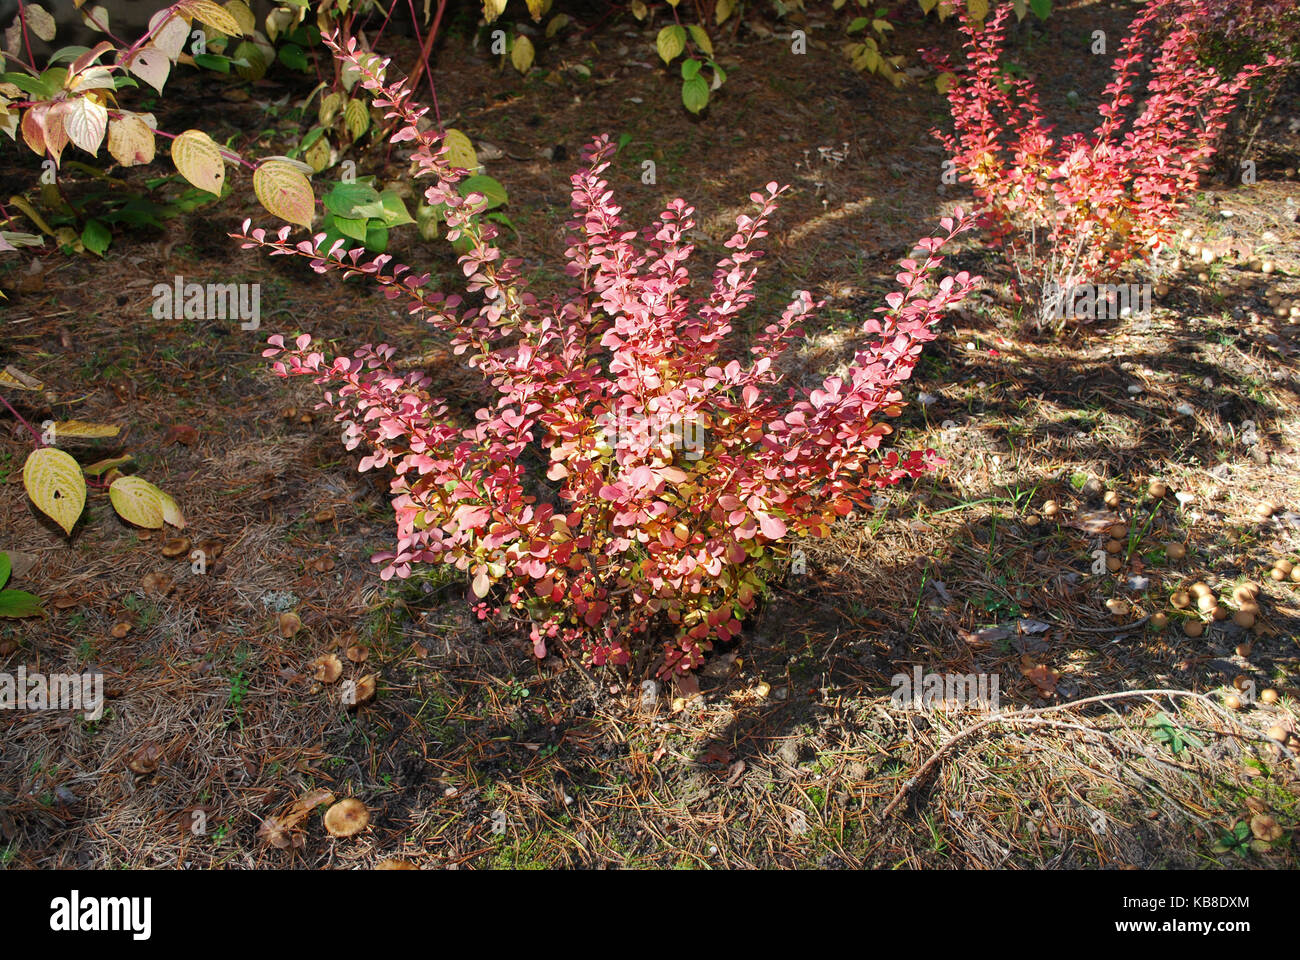 Berberis thunbergii (the Japanese barberry, Thunberg's barberry, or red barberry) grow in the flower bed. There are red leaves in the autumn. Stock Photo